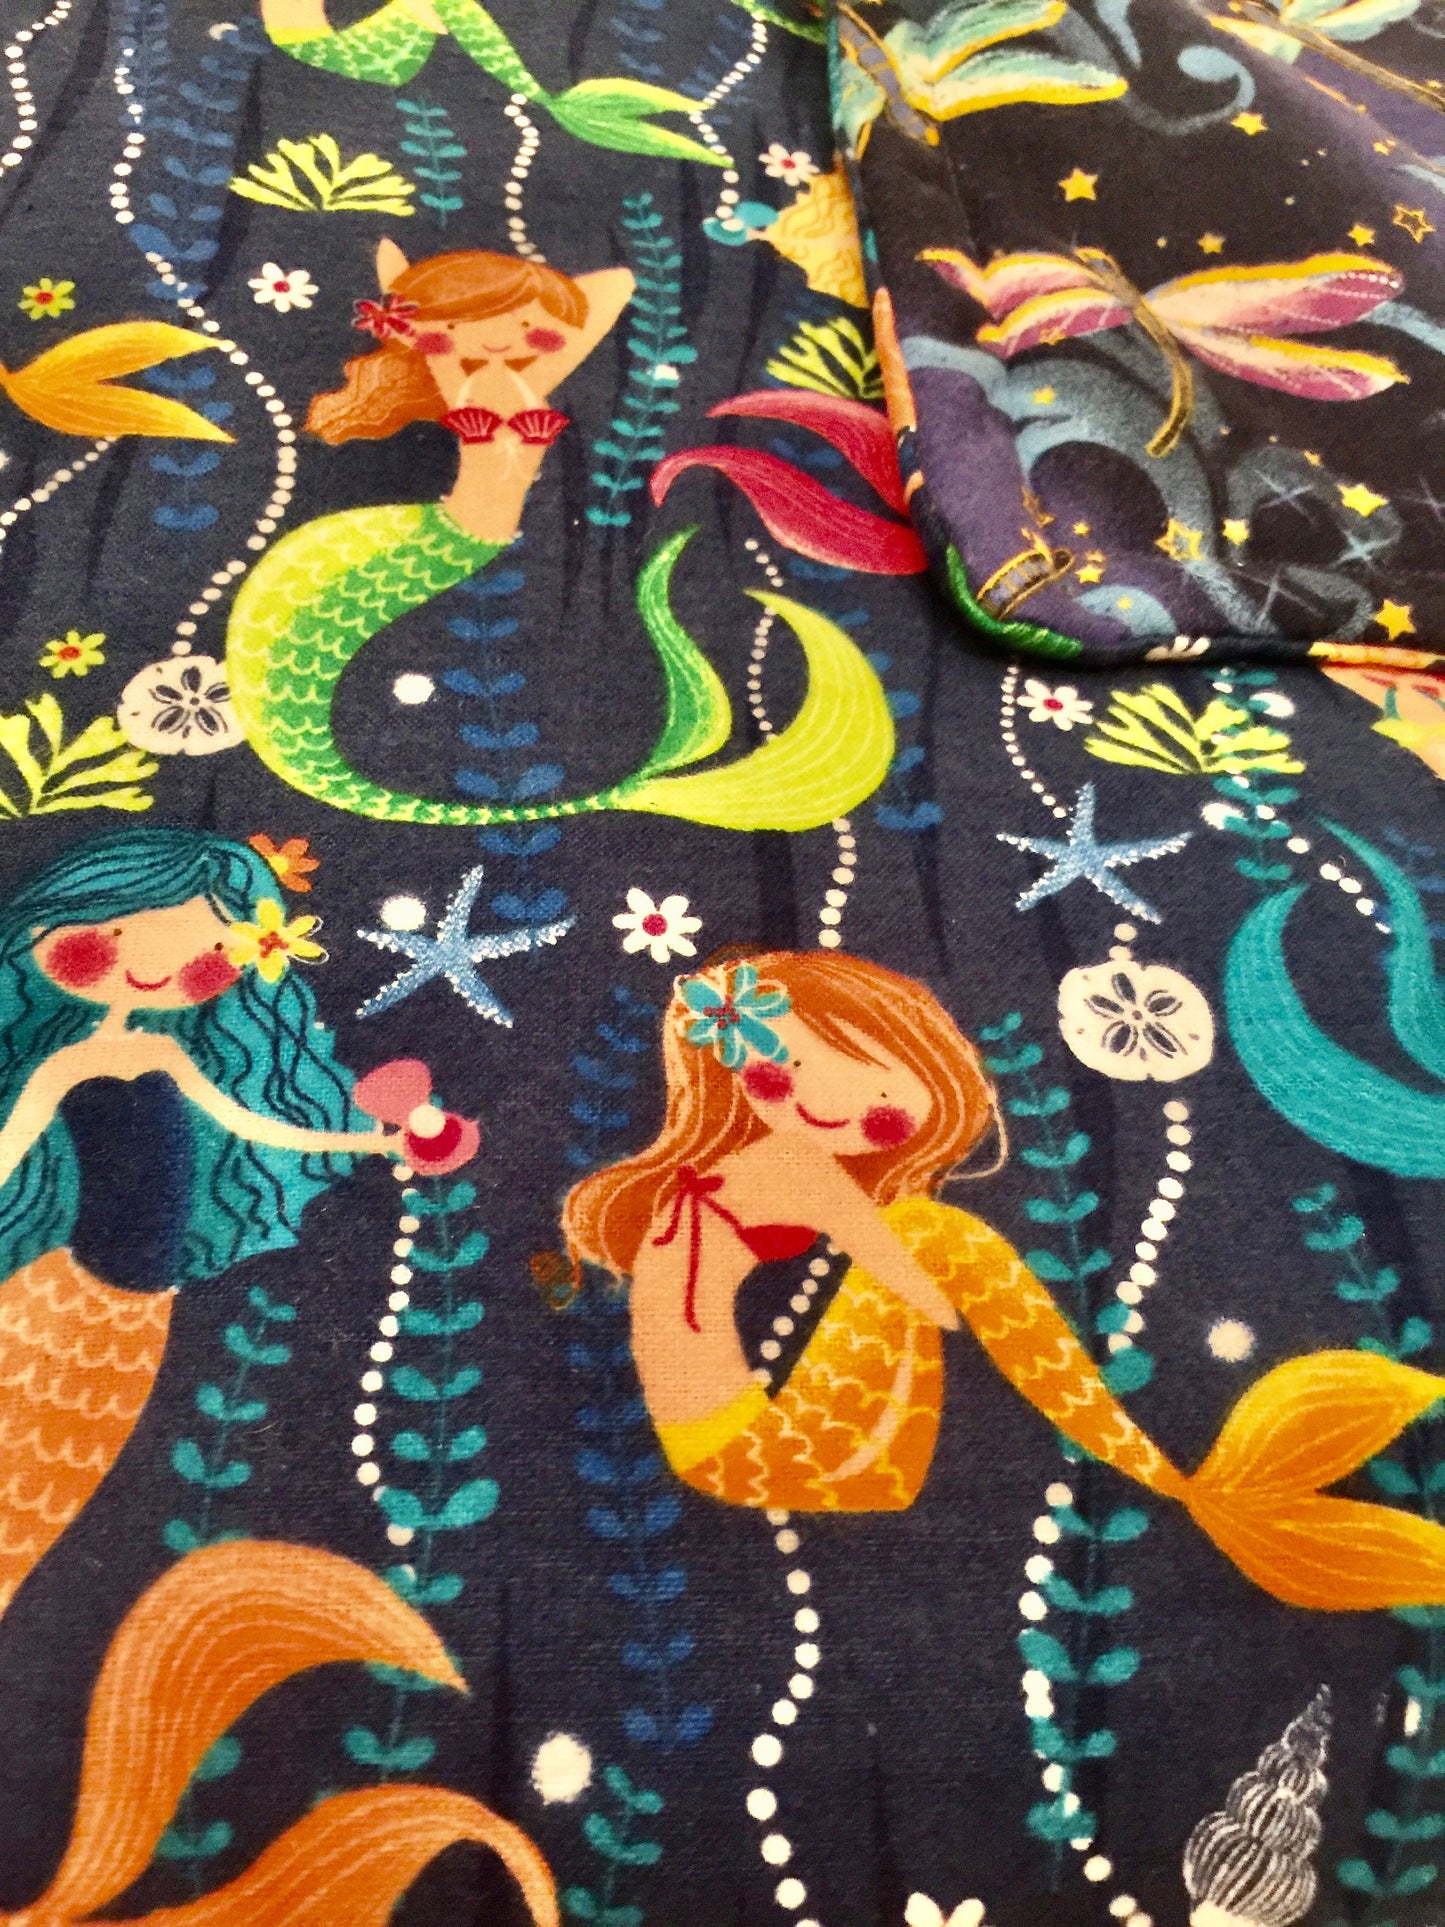 Colorful mermaid and dragonfly blanket lap quilt